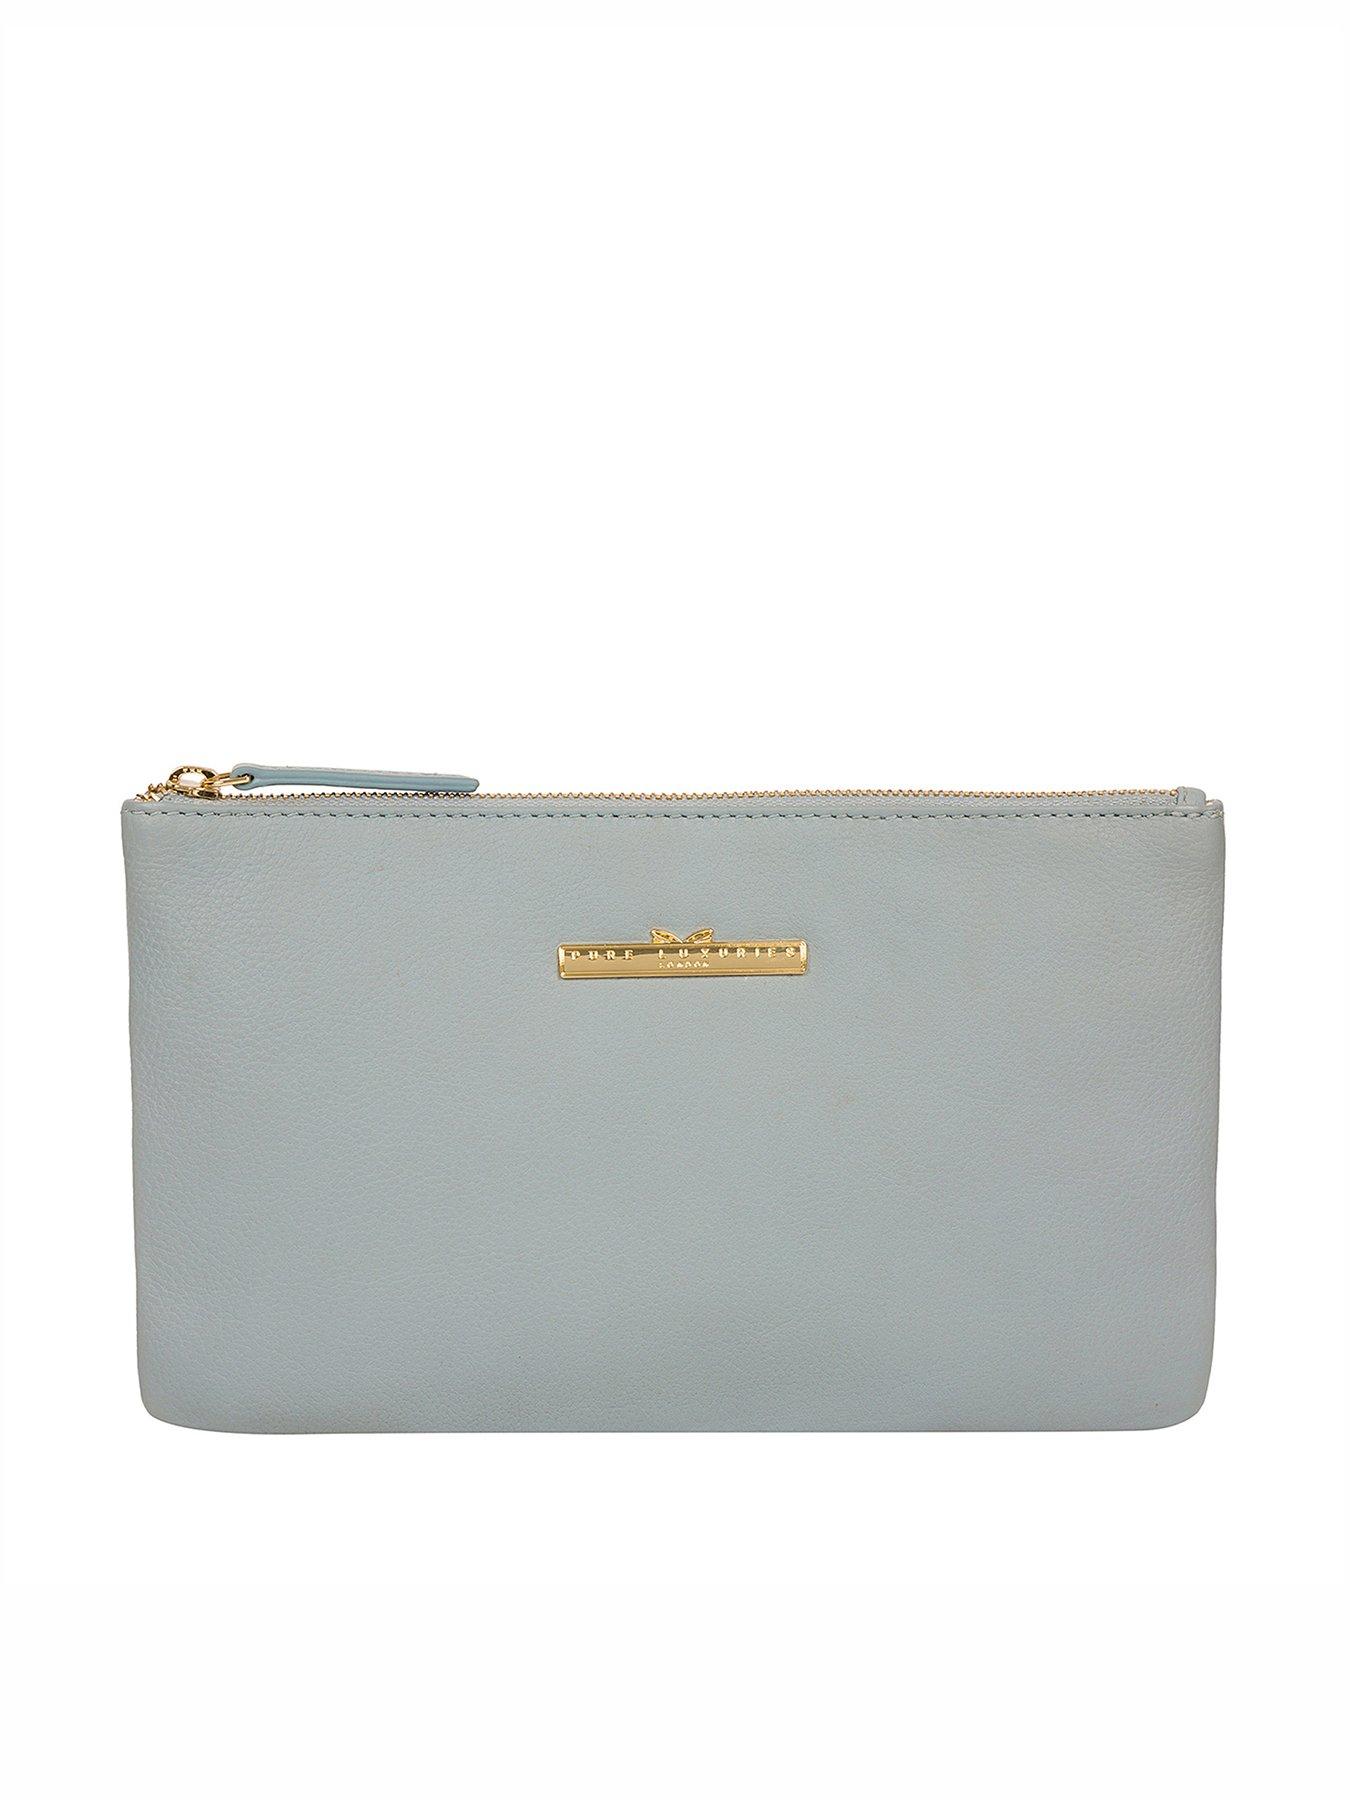 Bags & Purses Arlesey Zip Top Leather Clutch Bag - Blue